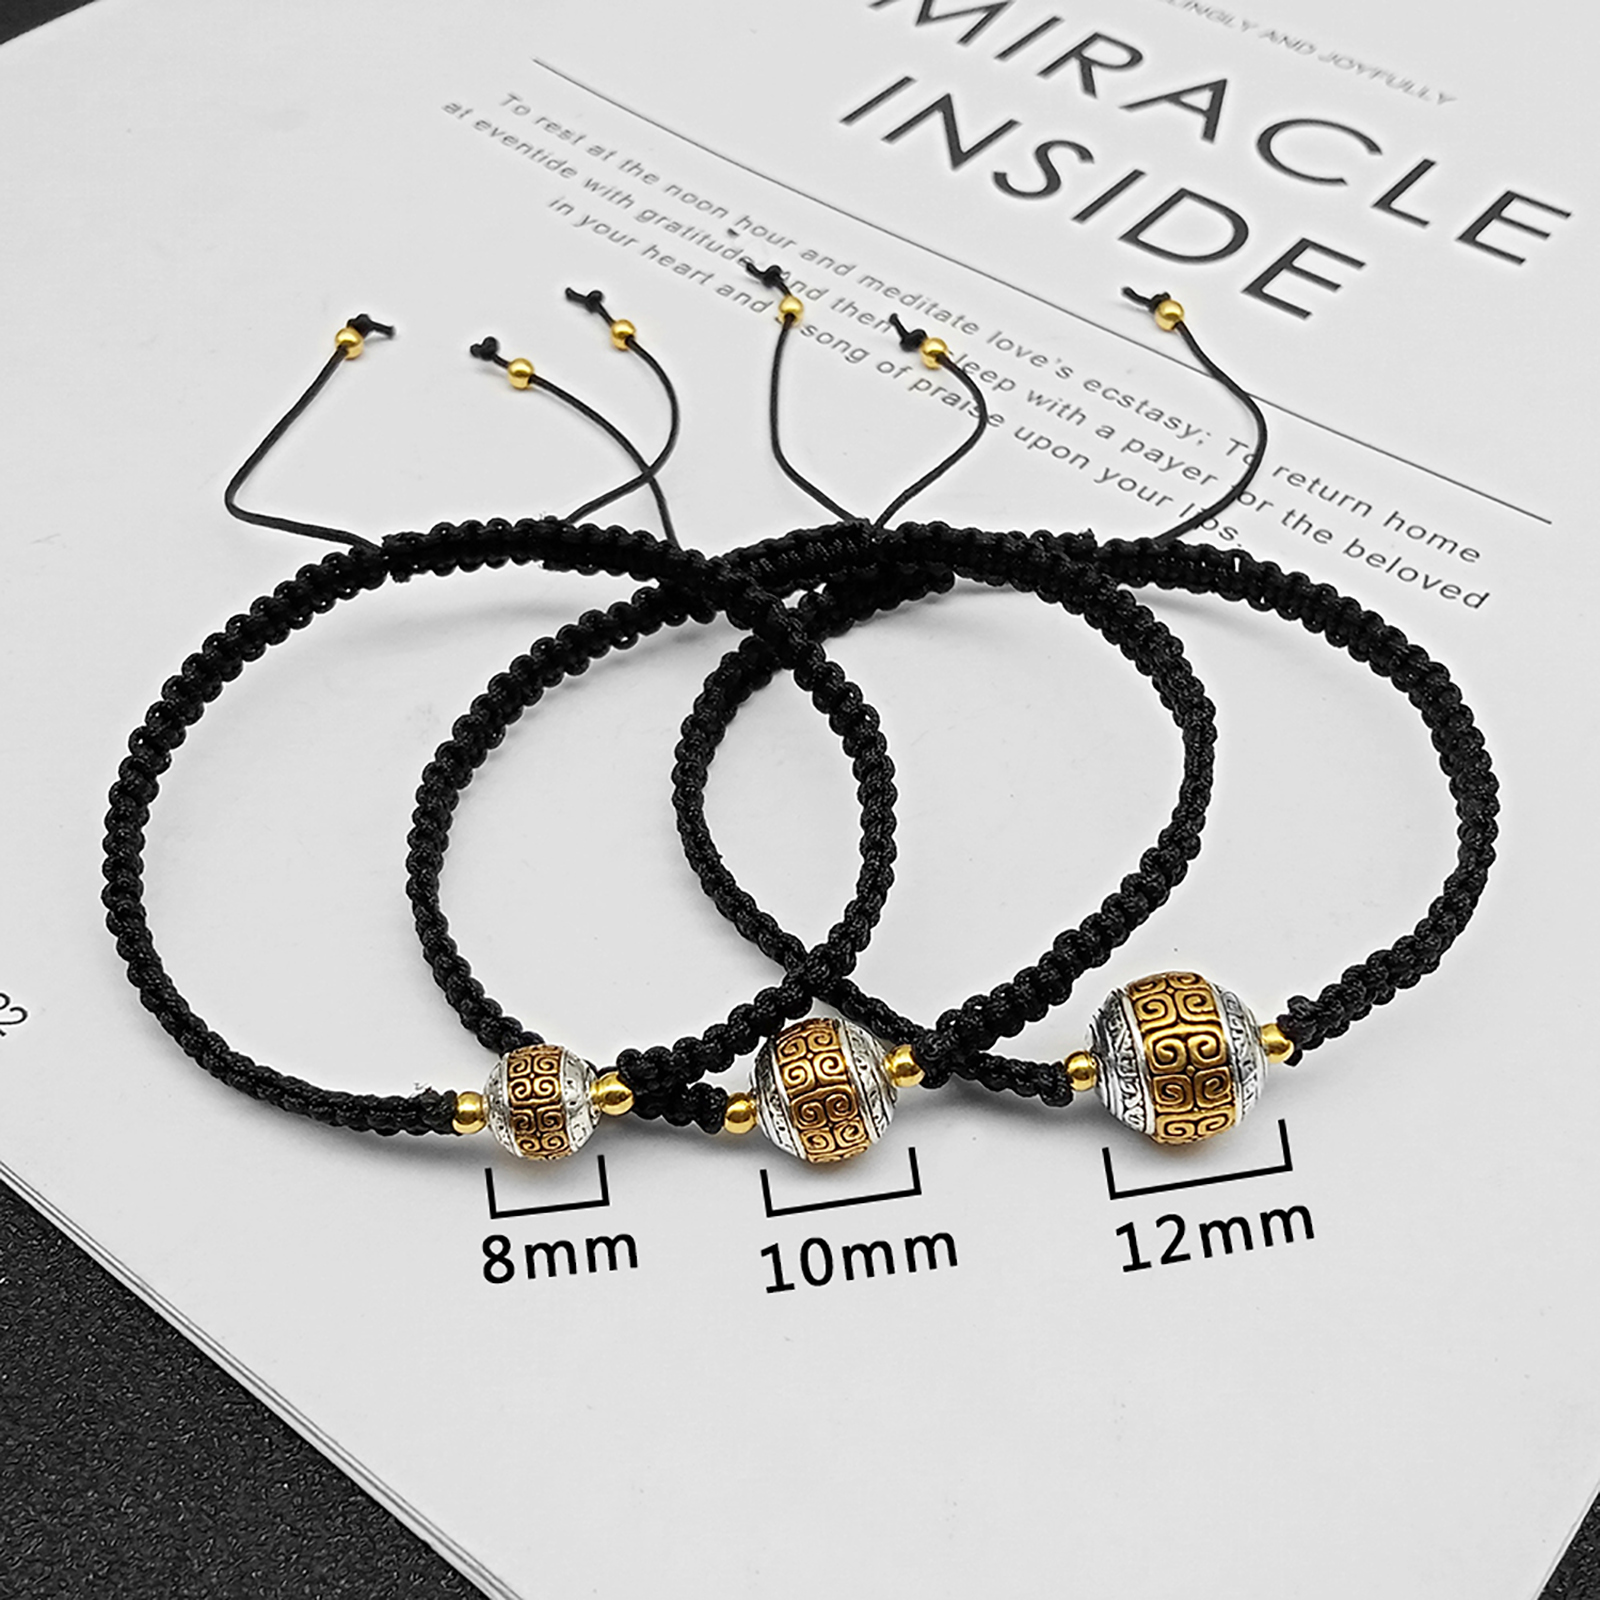 The beads are 8mm, 10mm, and 12mm respectively, and the bracelet size is adjustable